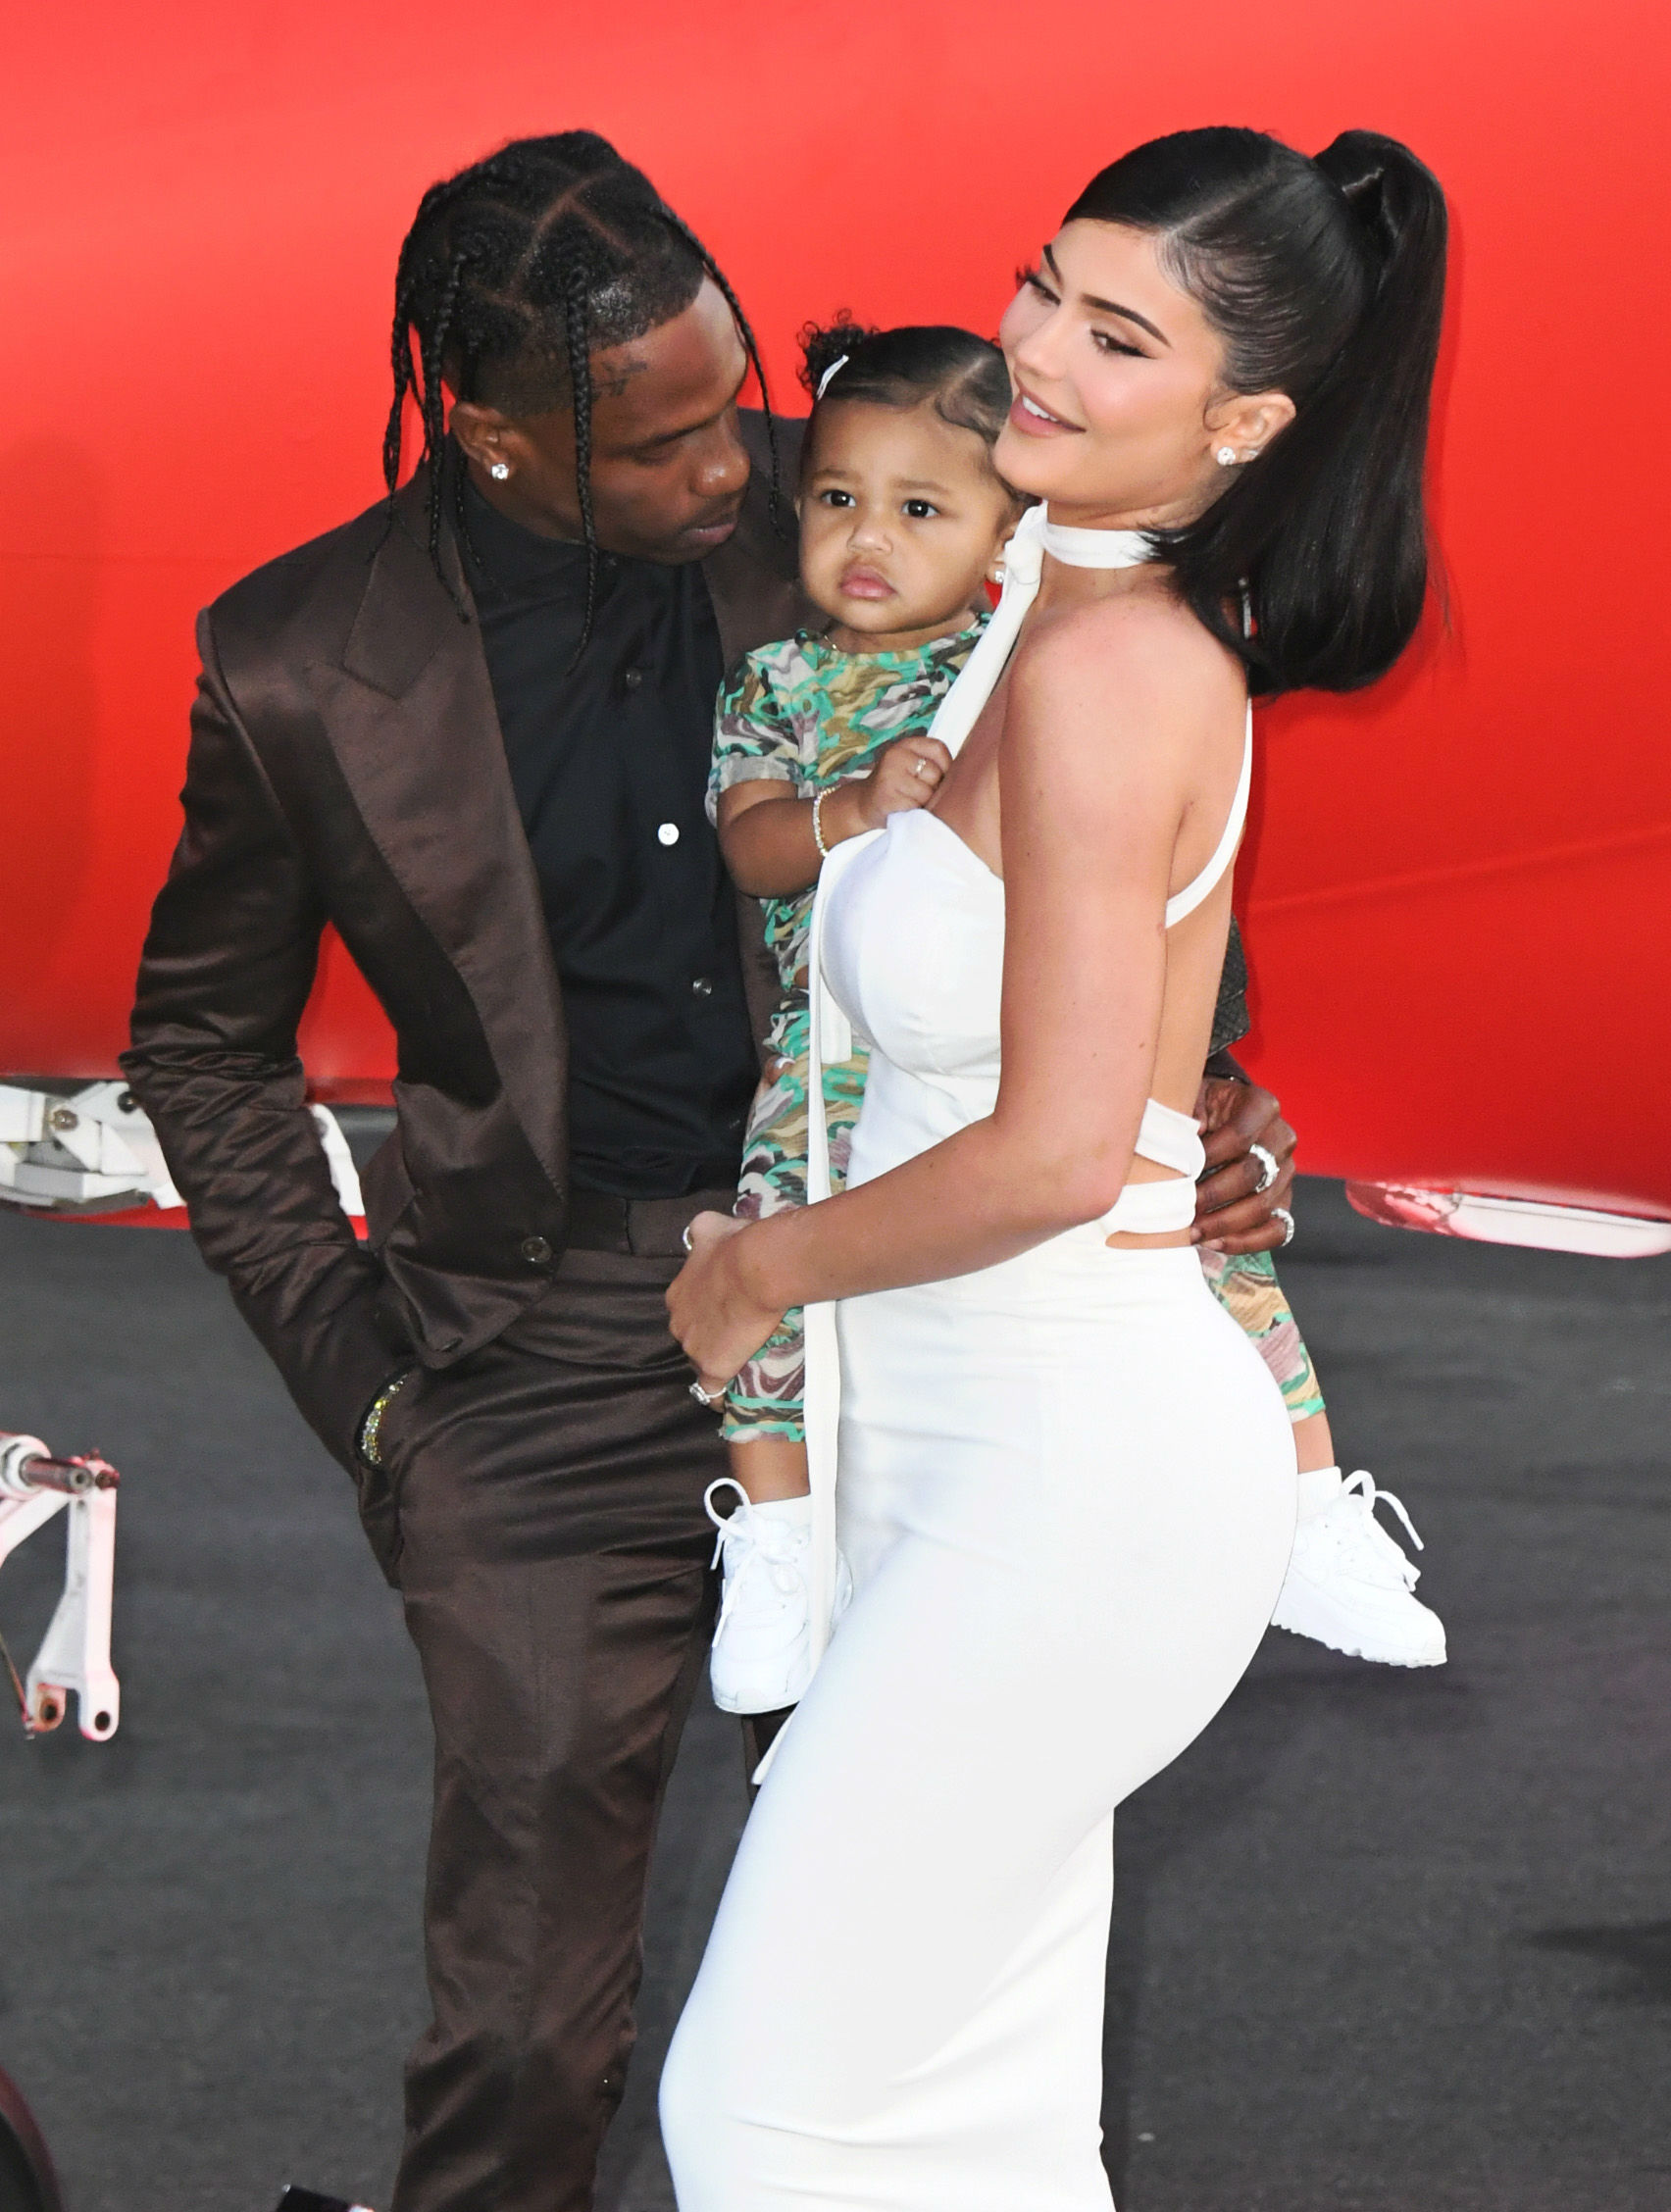 IN PICS: Kylie Jenner's 1-Year-Old Daughter Stormi Webster Makes Her Red Carpet Debut